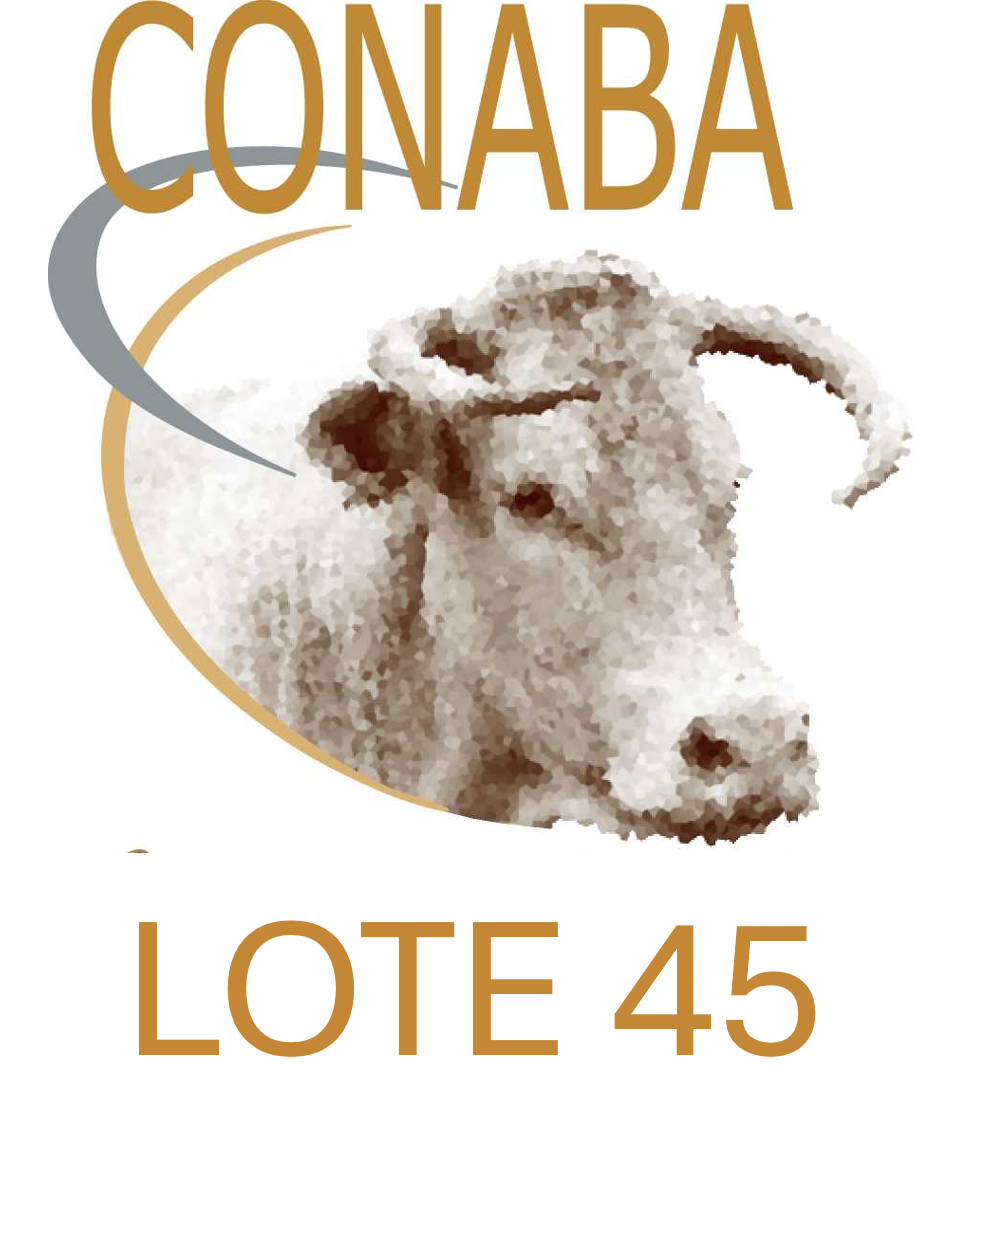 LOTE 45